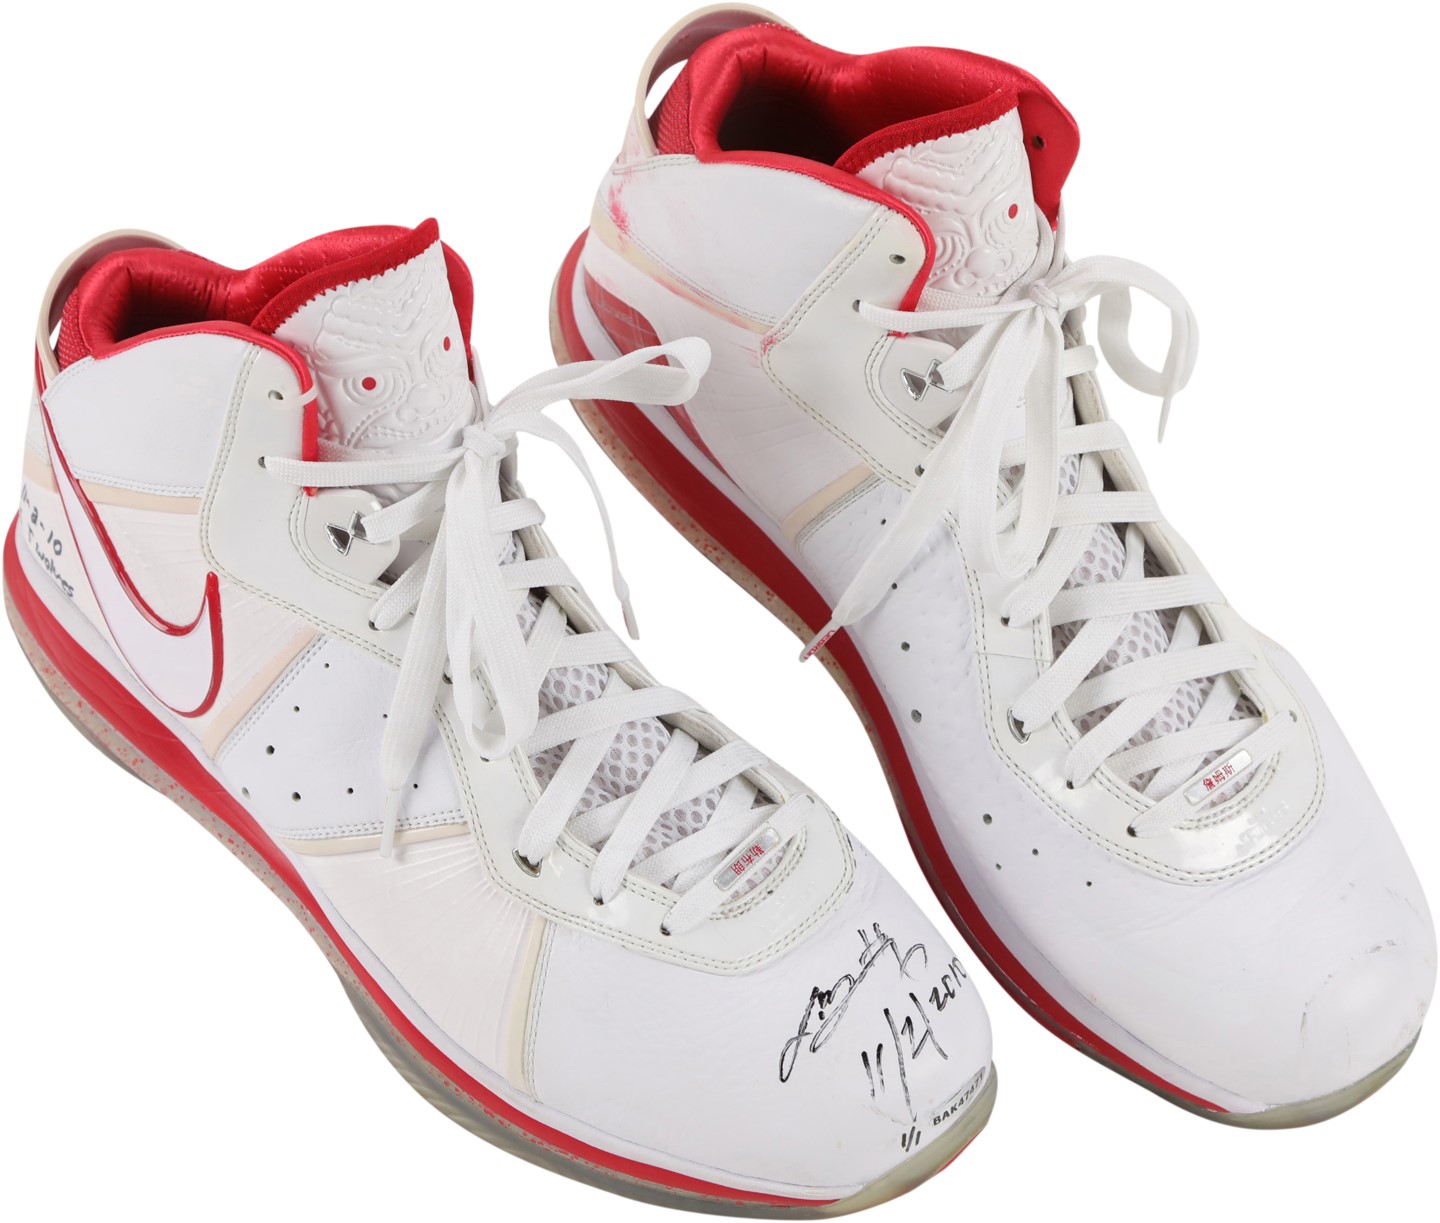 - November 2, 2010 LeBron James Photo-Matched Signed Game Worn Sneakers from 1st Miami Heat Double-Double (UDA 1/1 & Resolution Photomatching LOA)